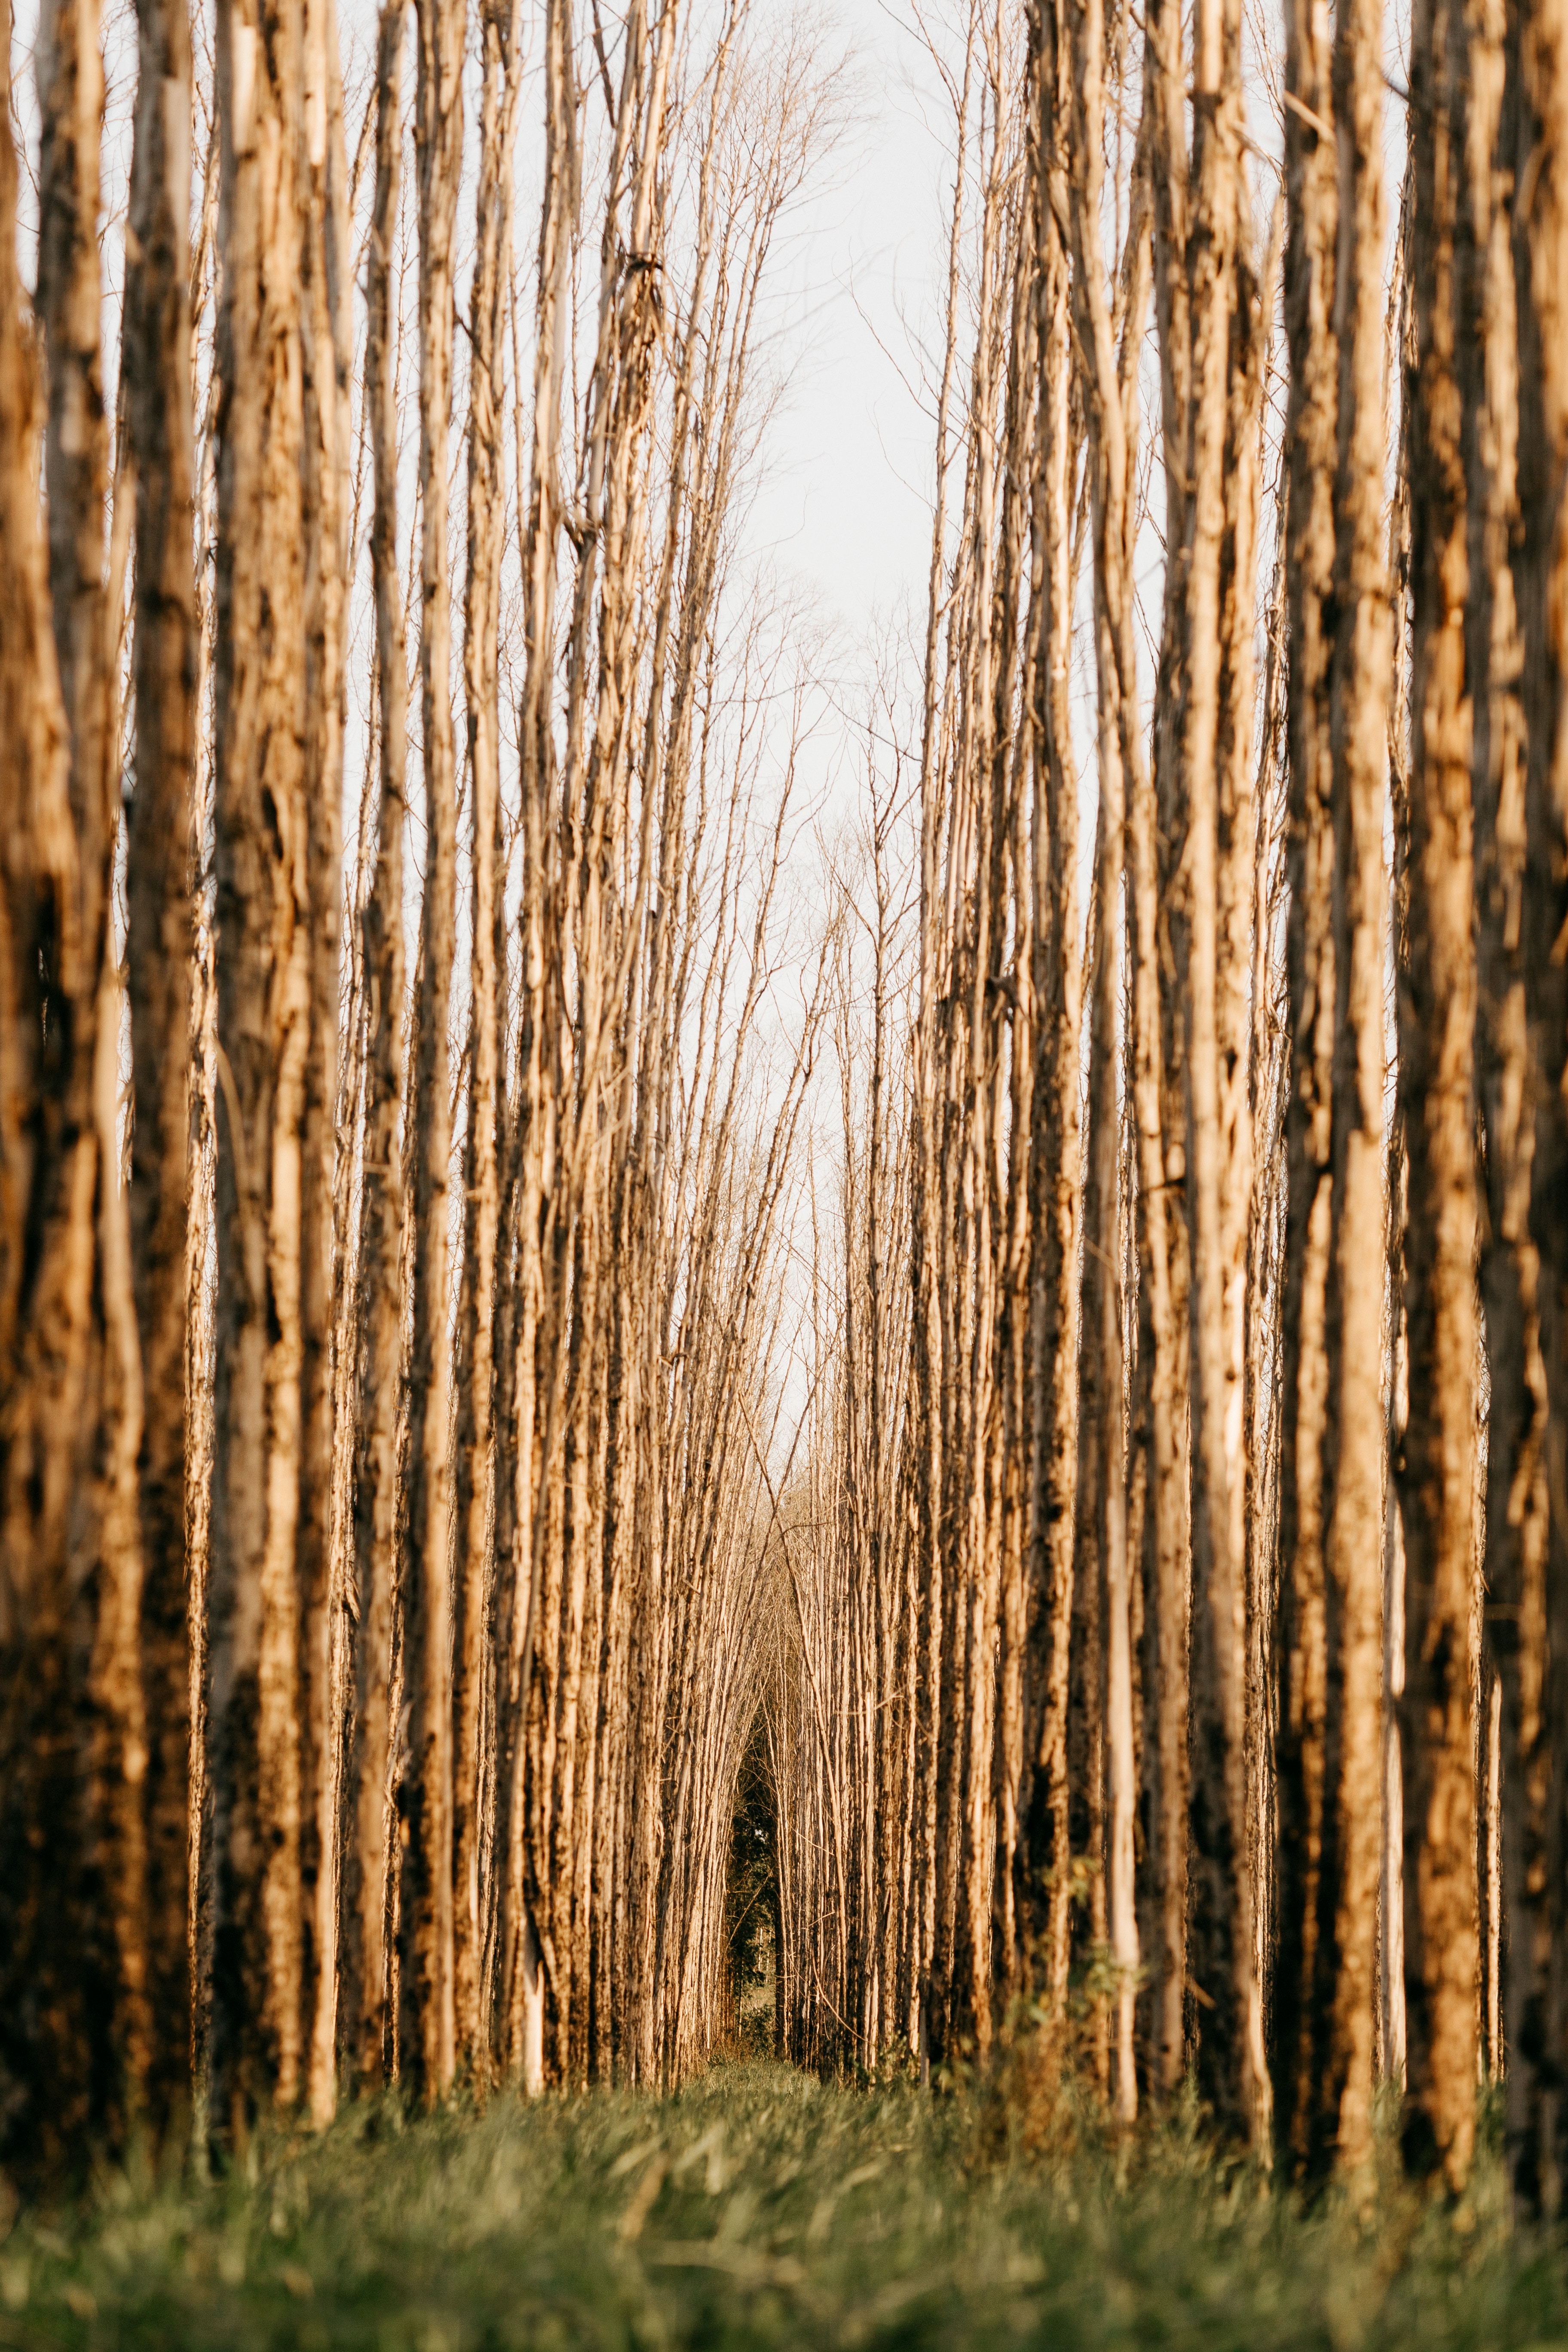 trees, ranks, rows, forest, nature